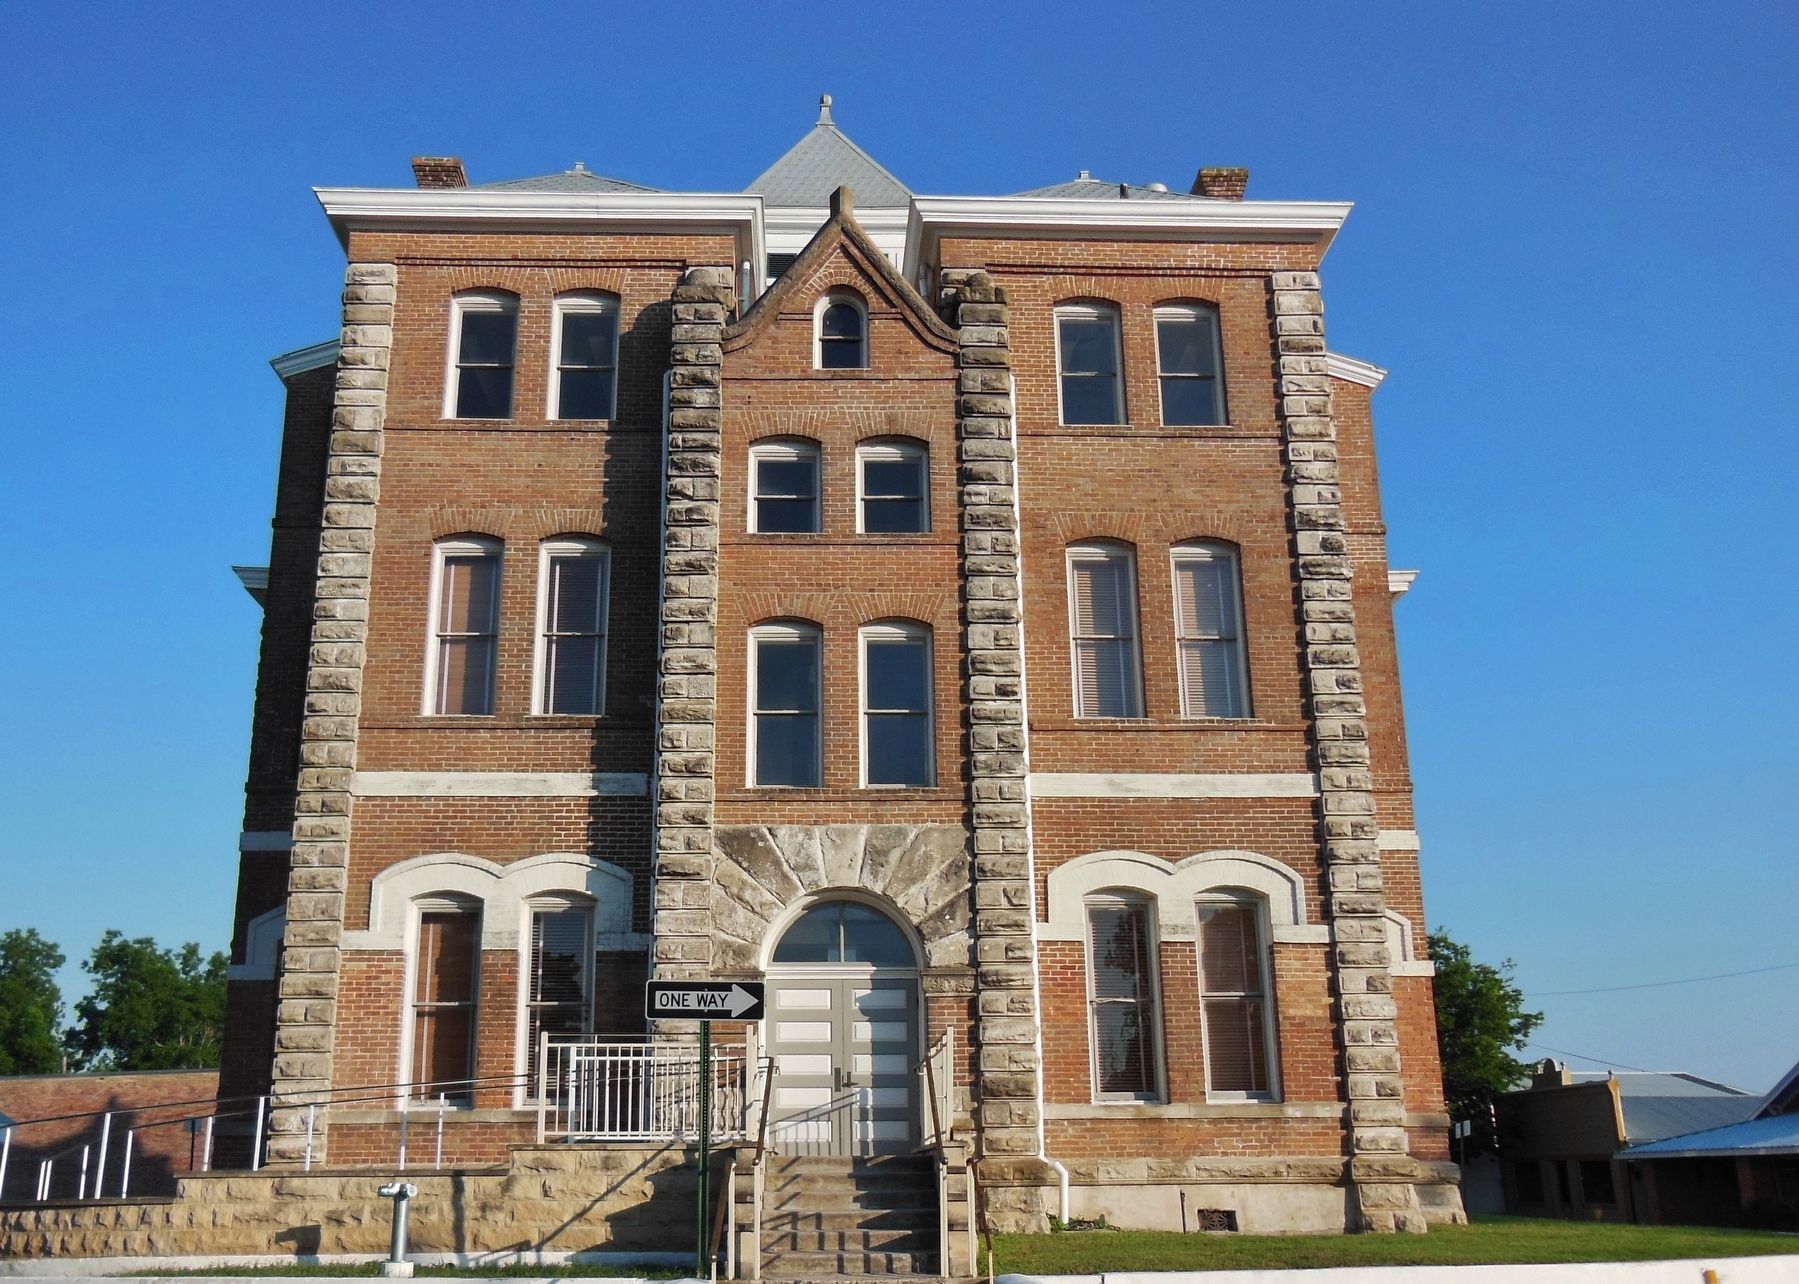 Grimes County Courthouse (<i>north side</i>) image. Click for full size.